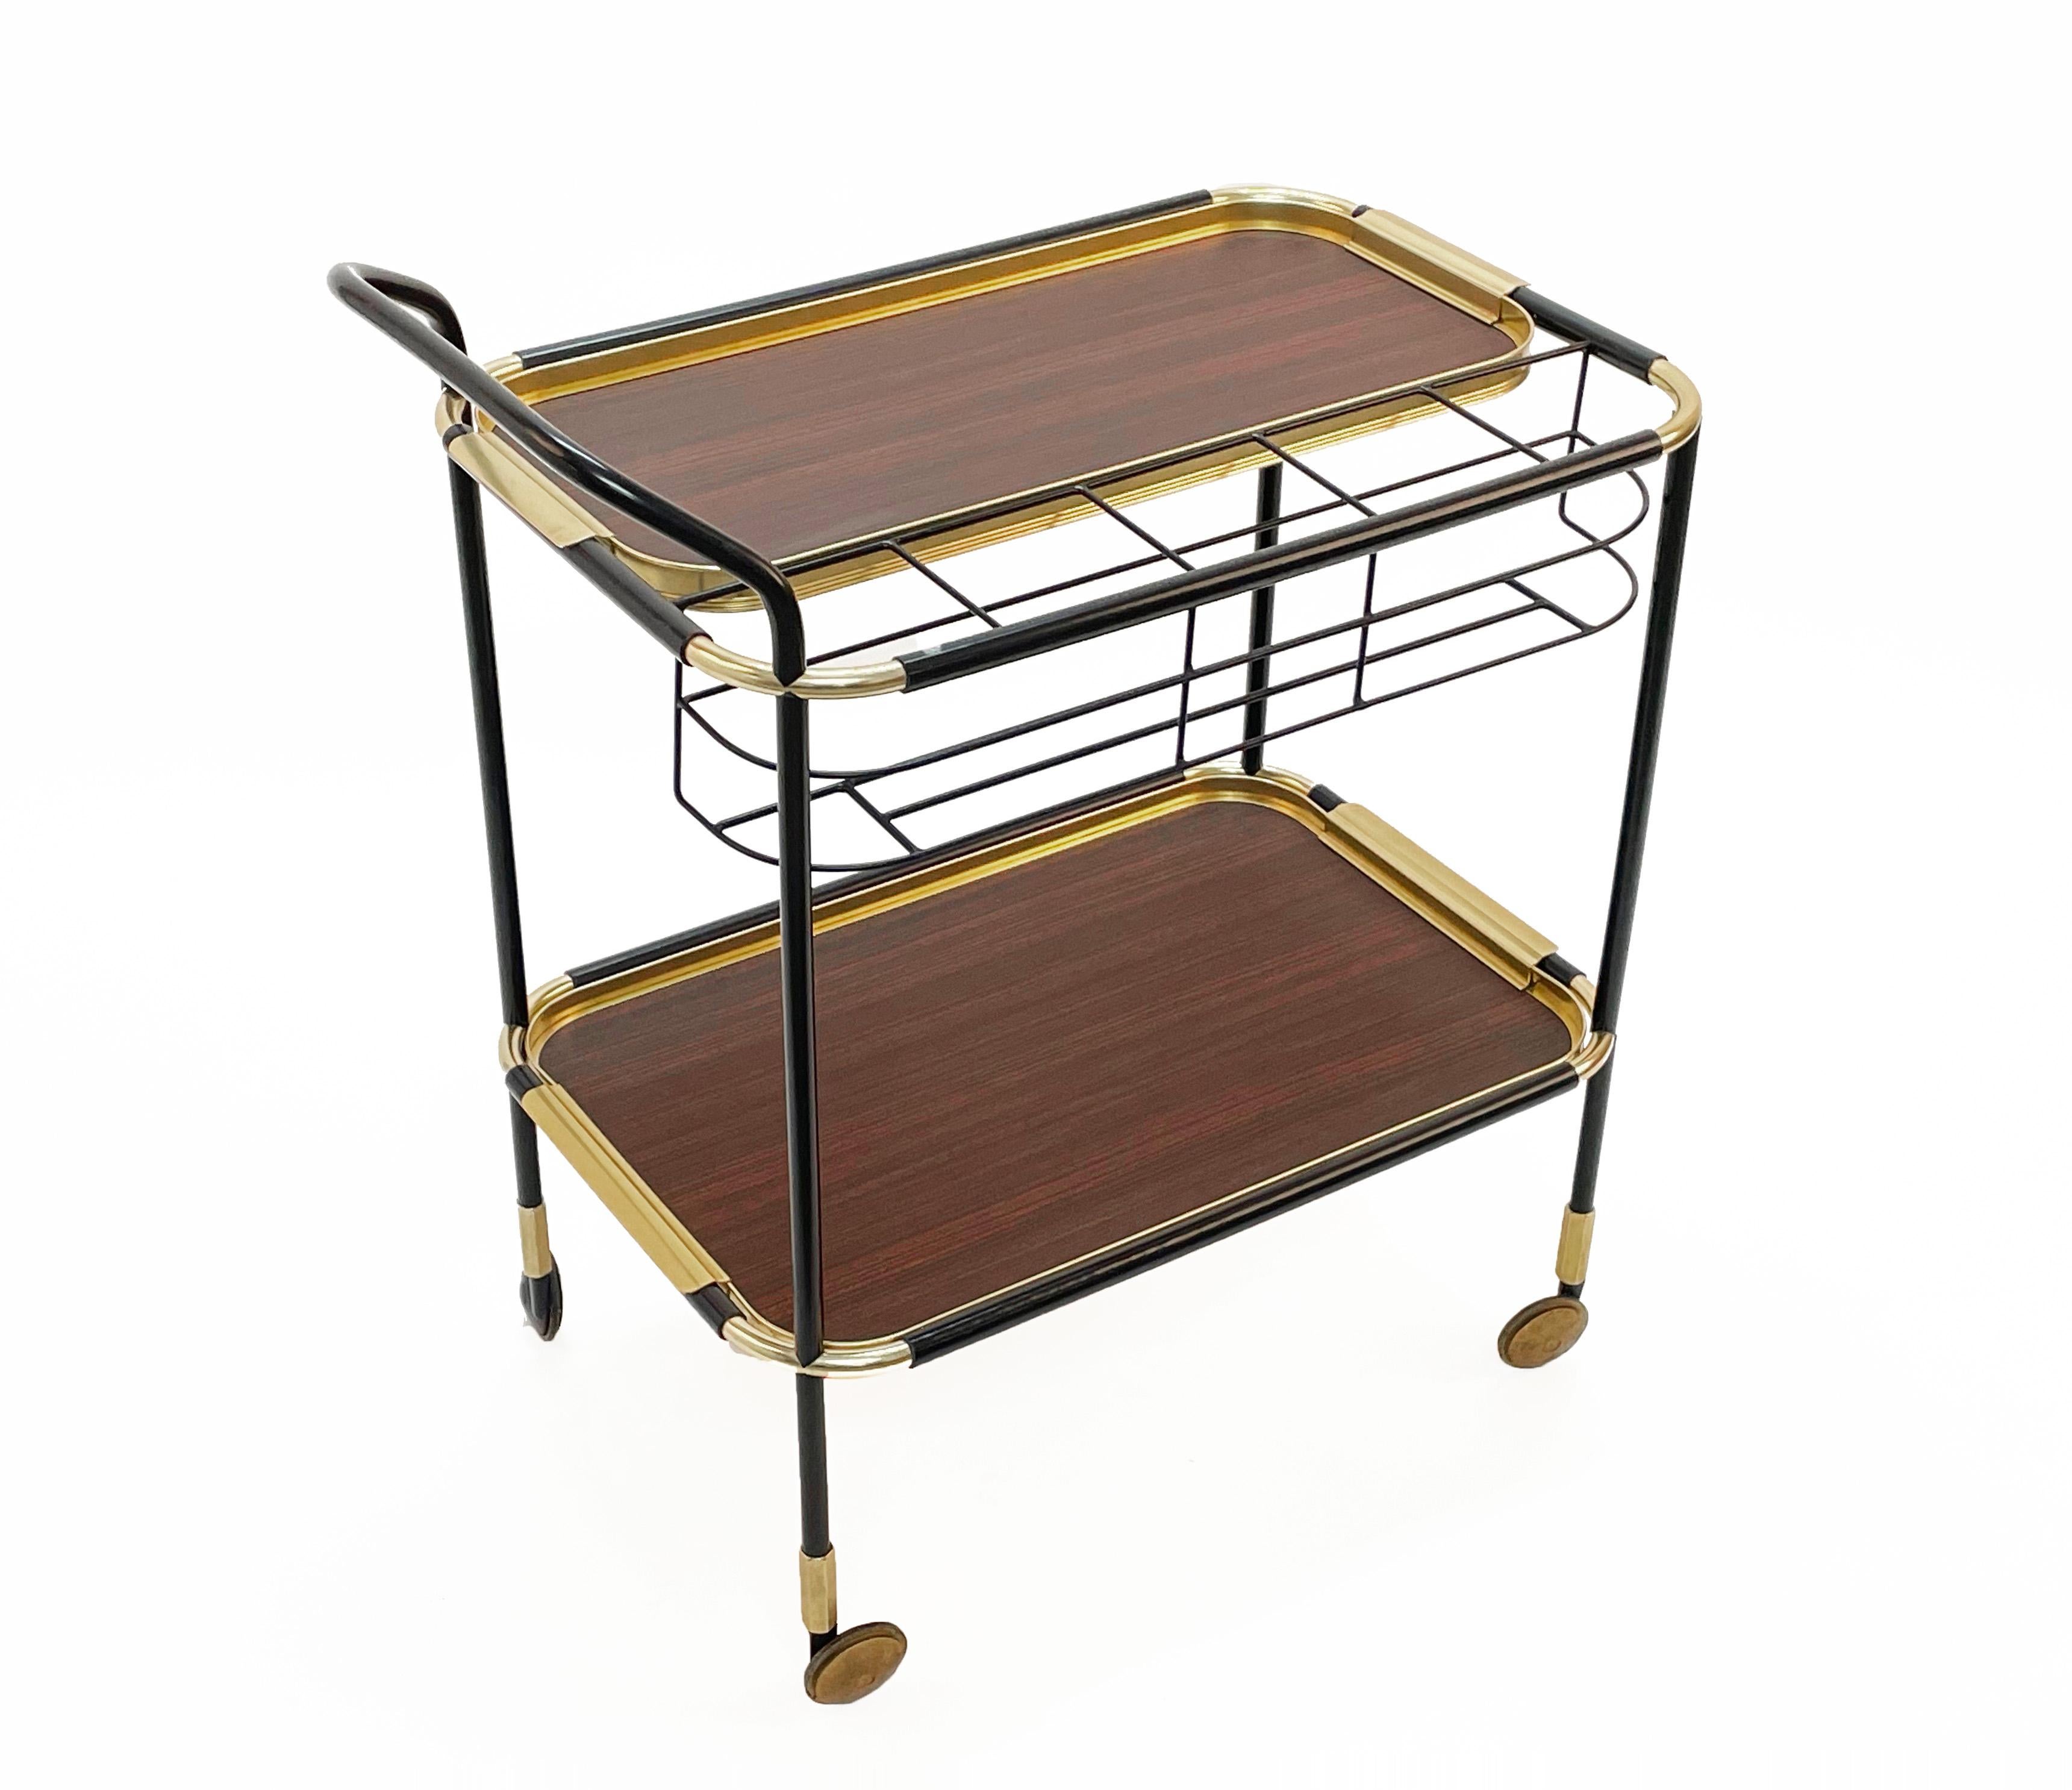 Lacquered Ico Parisi Mid-Century Mahogany Bar Cart with Trays and Bottle Holder, MB 1960s For Sale